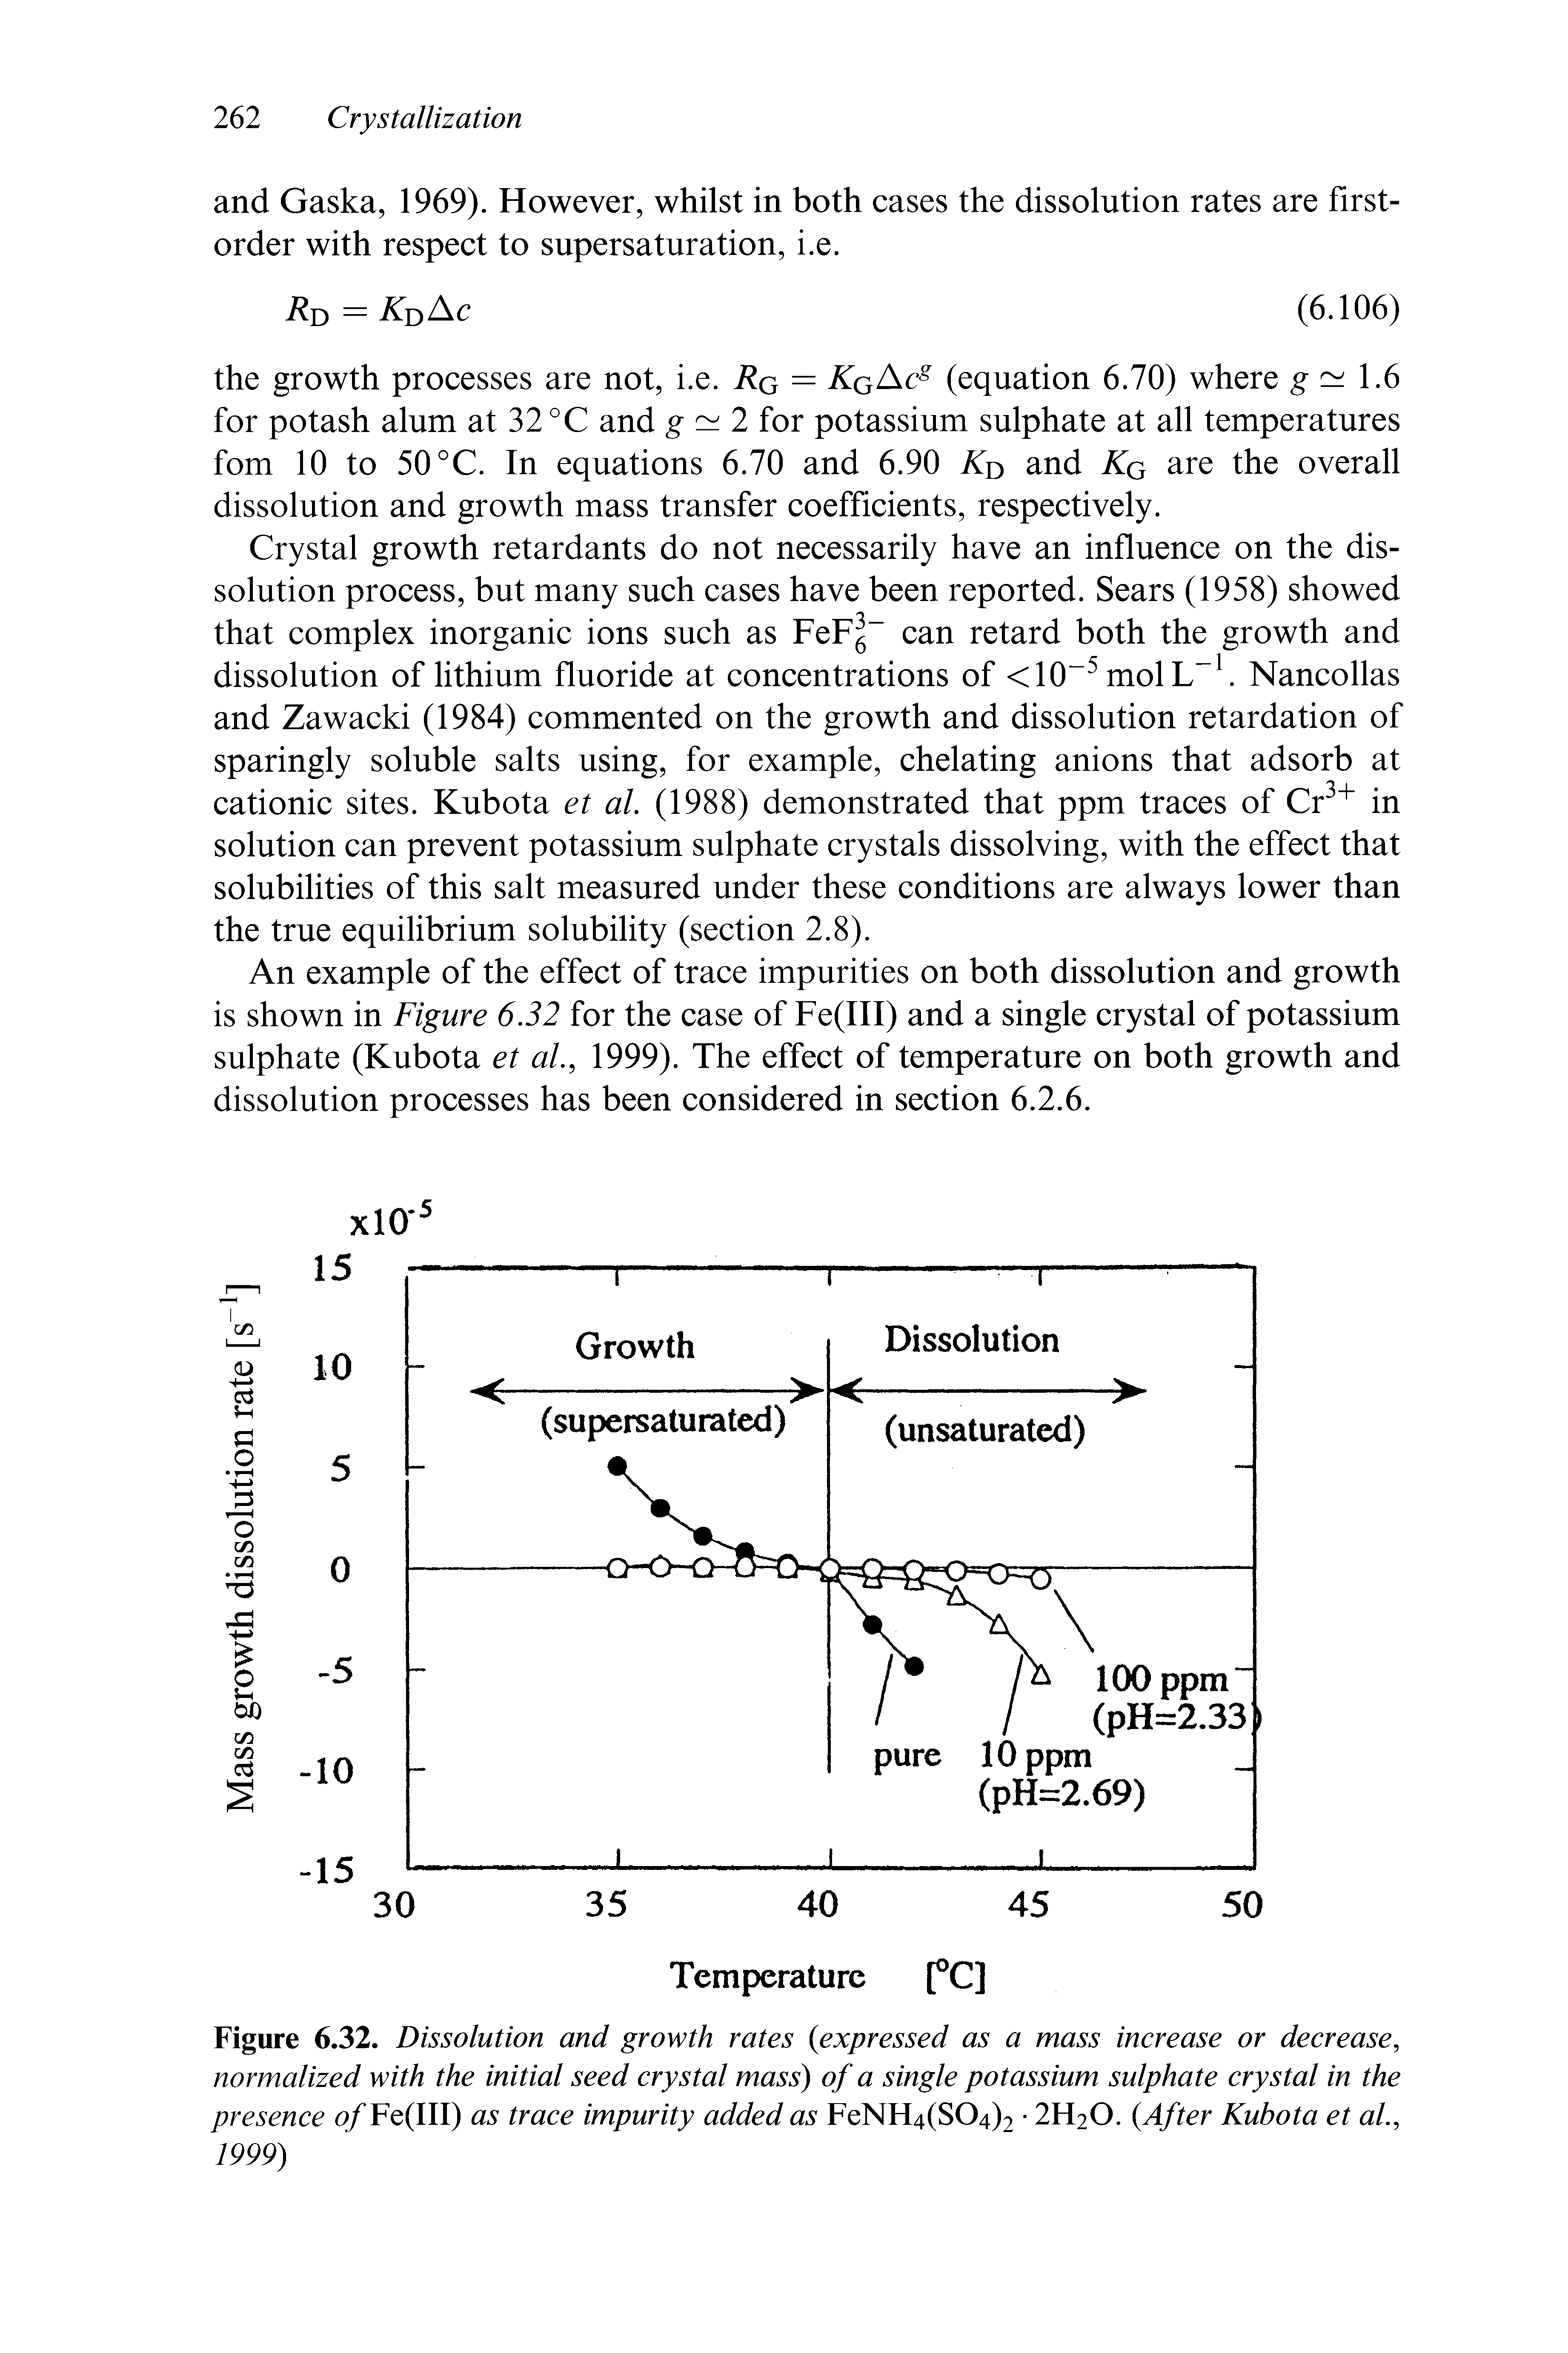 Figure 6.32. Dissolution and growth rates (expressed as a mass increase or decrease, normalized with the initial seed crystal mass) of a single potassium sulphate crystal in the presence o/Fe(III) as trace impurity added as FeNH4(S04)2 2H2O. (After Kubota et al., 1999)...